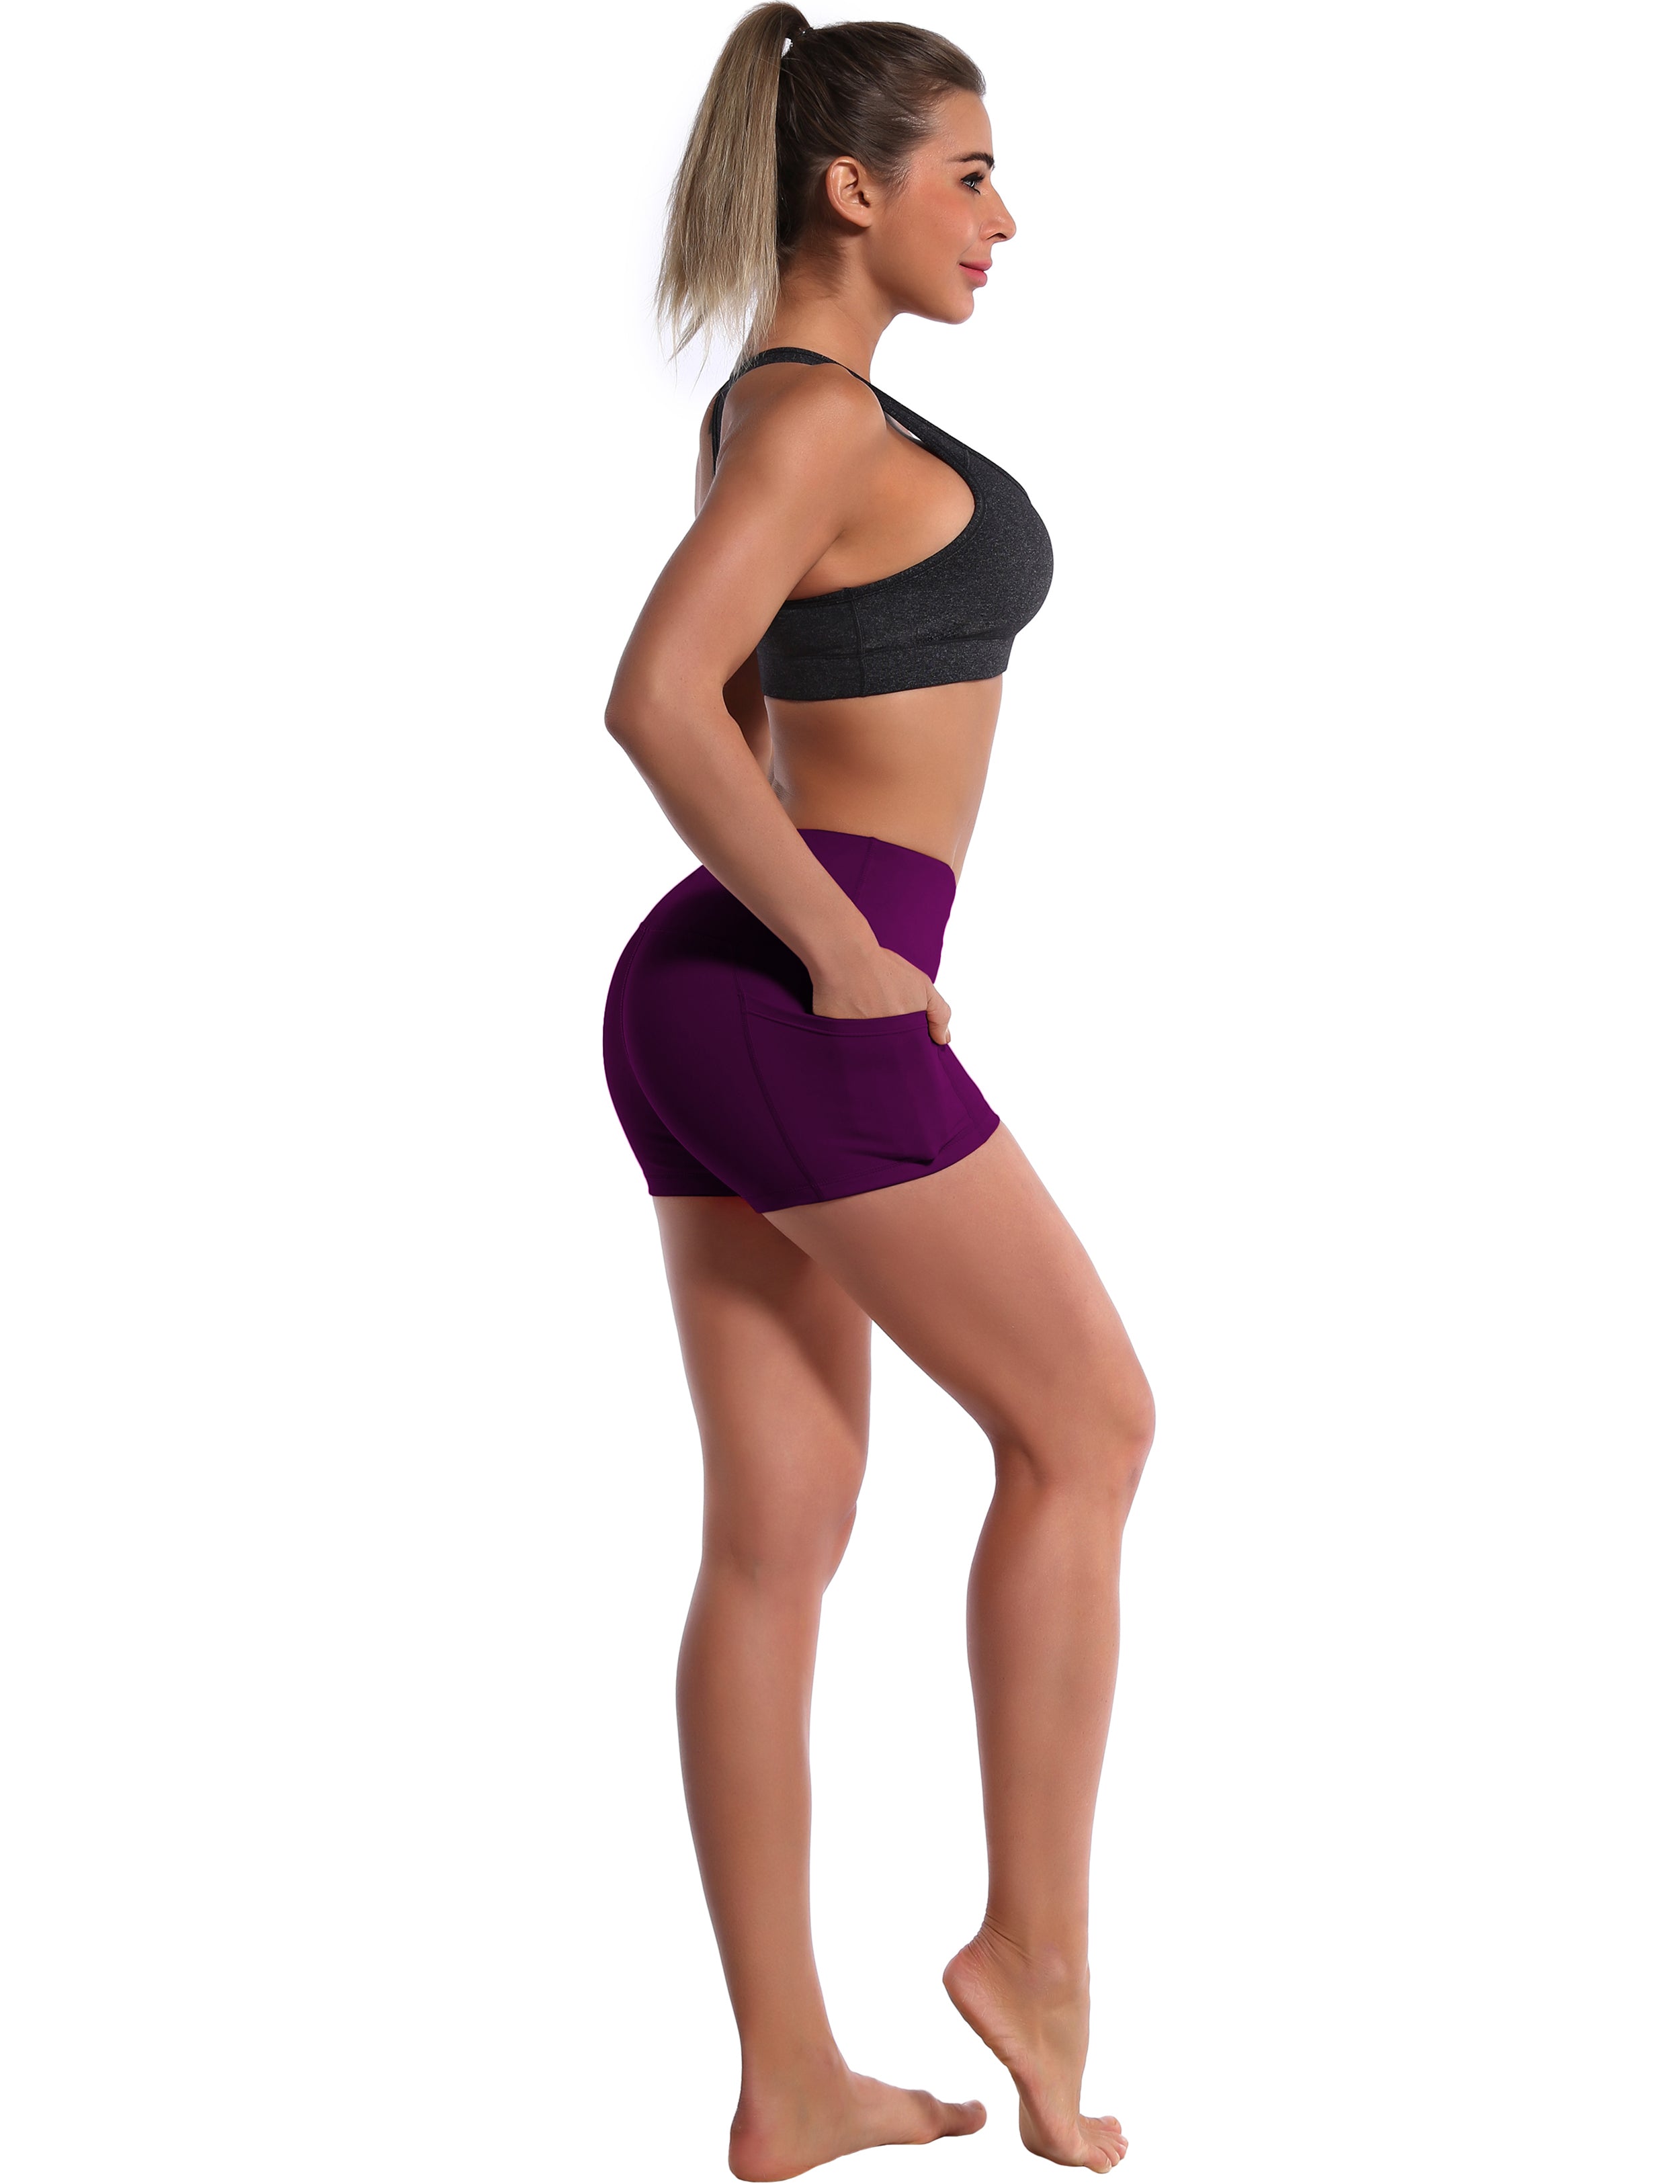 2.5" Side Pockets Yoga Shorts plum Sleek, soft, smooth and totally comfortable: our newest sexy style is here. Softest-ever fabric High elasticity High density 4-way stretch Fabric doesn't attract lint easily No see-through Moisture-wicking Machine wash 78% Polyester, 22% Spandex